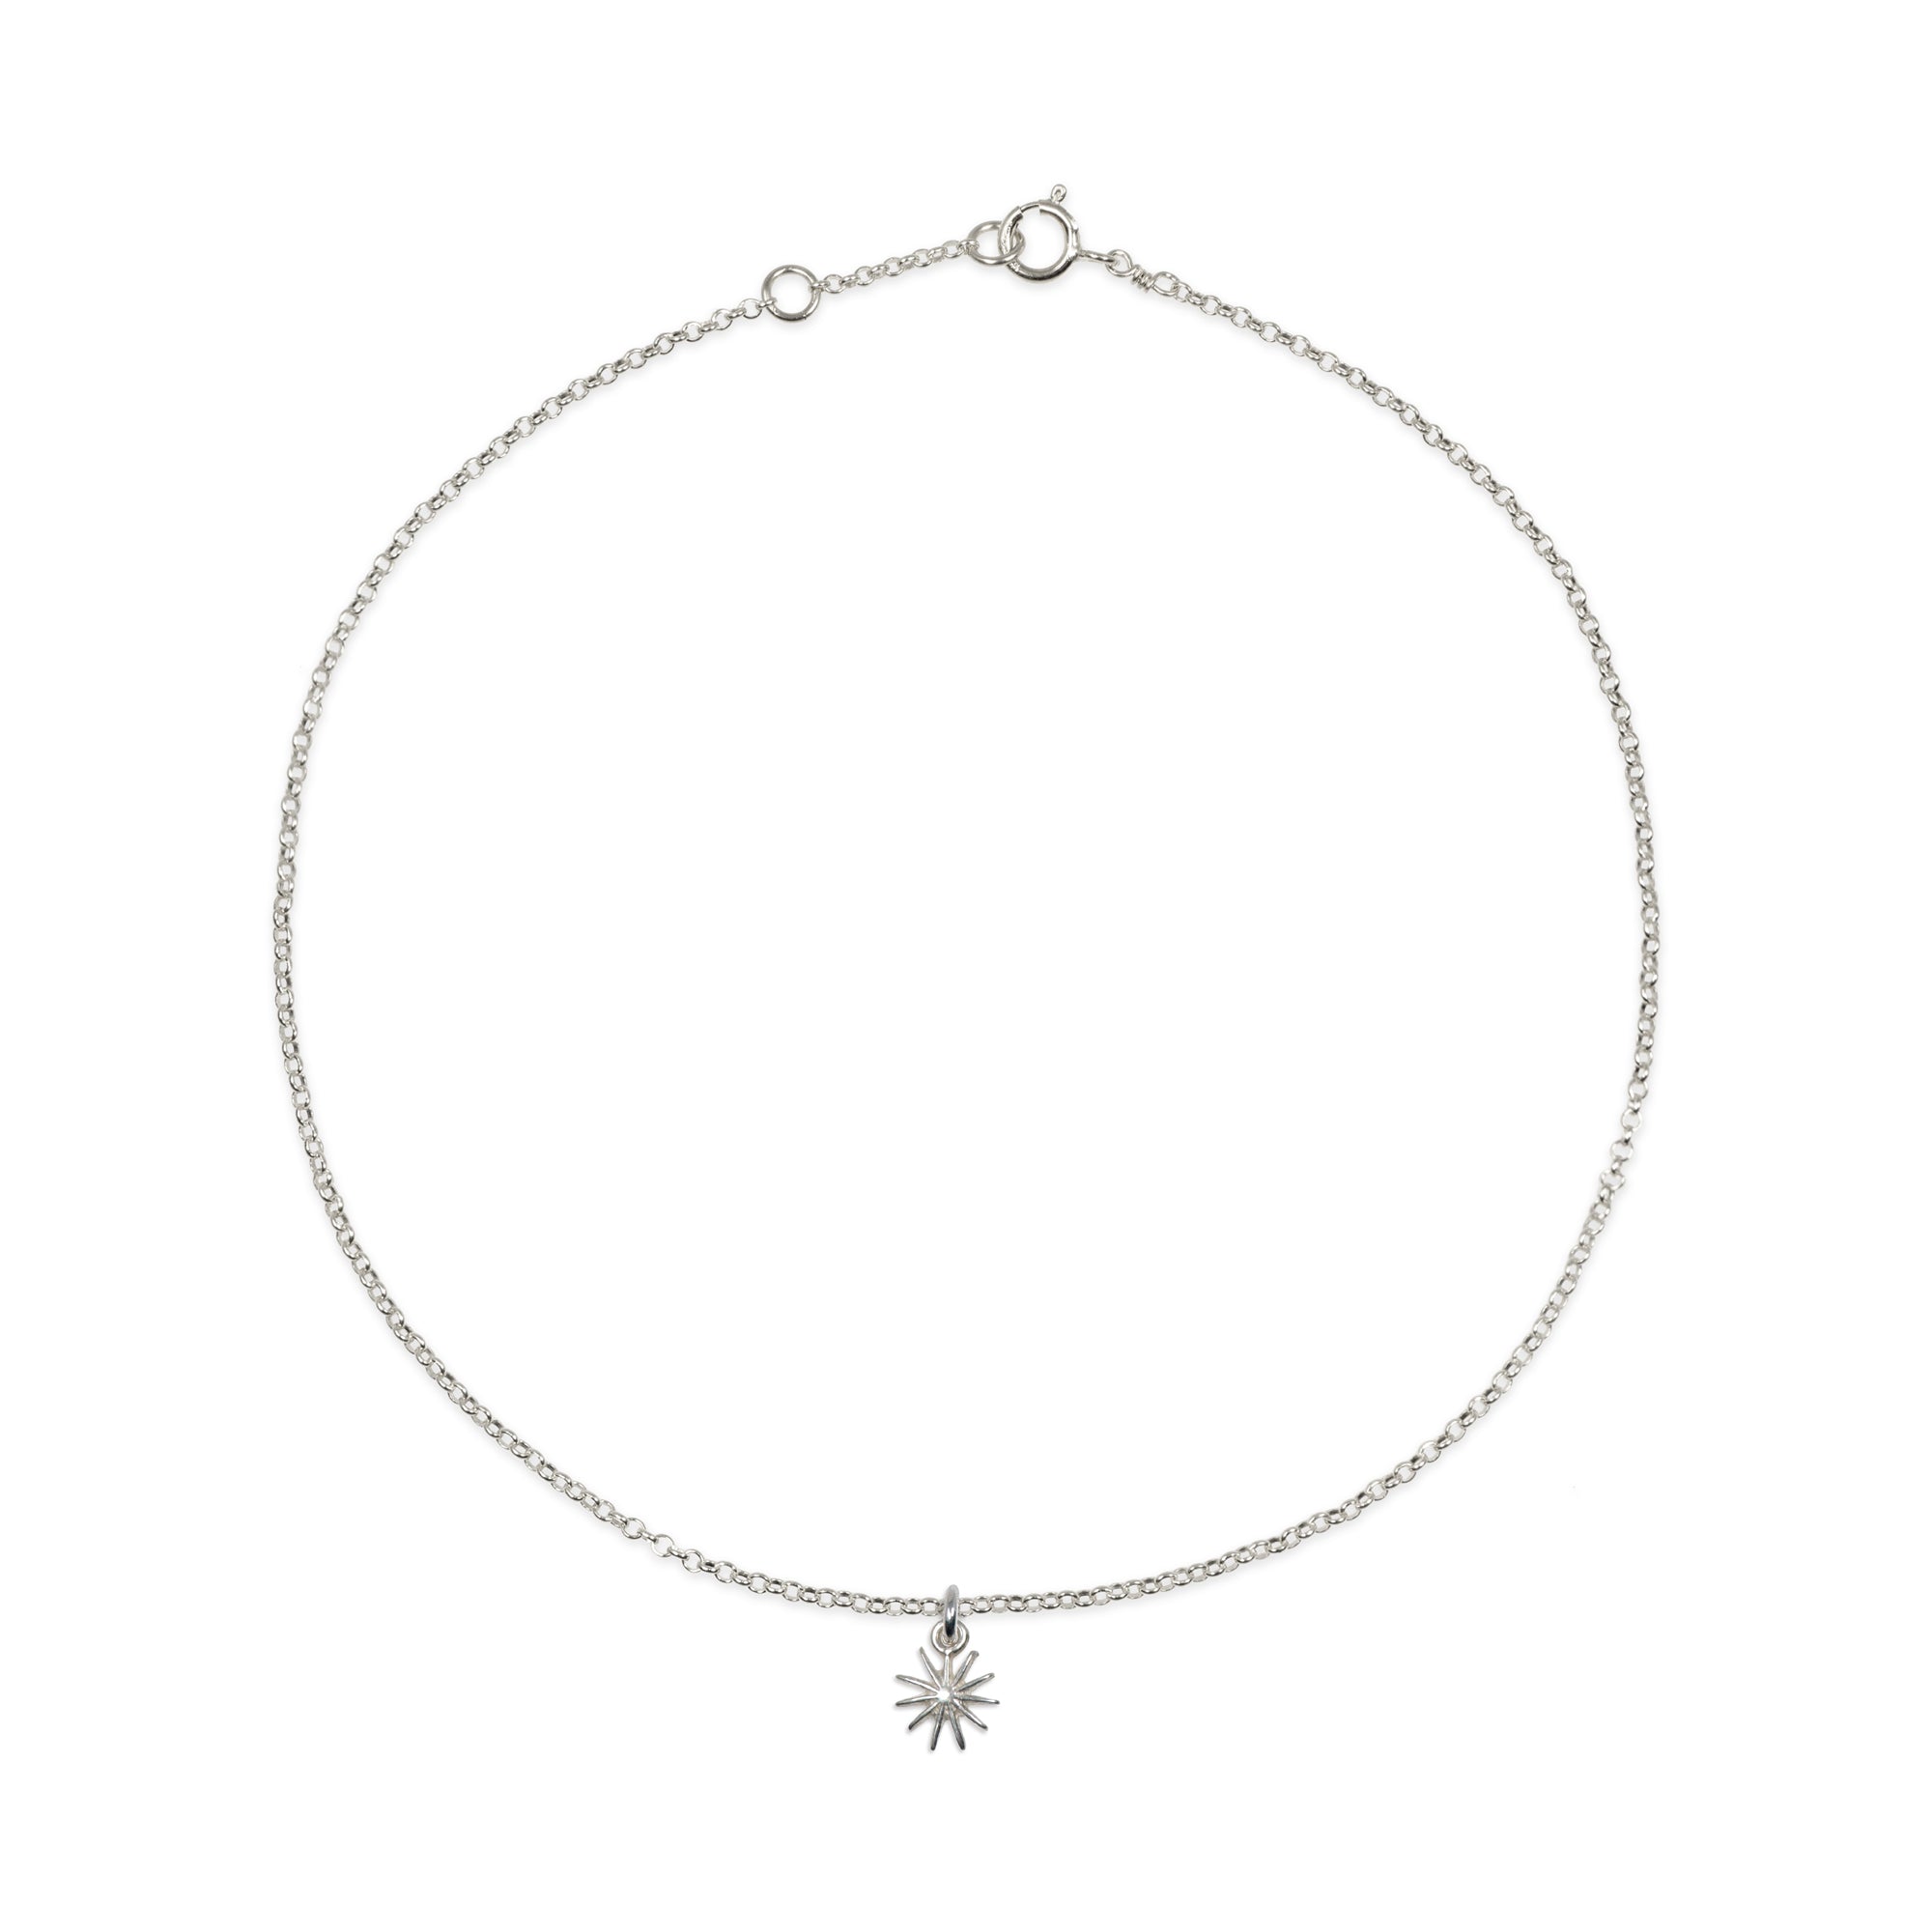 Anklet with petite starburst